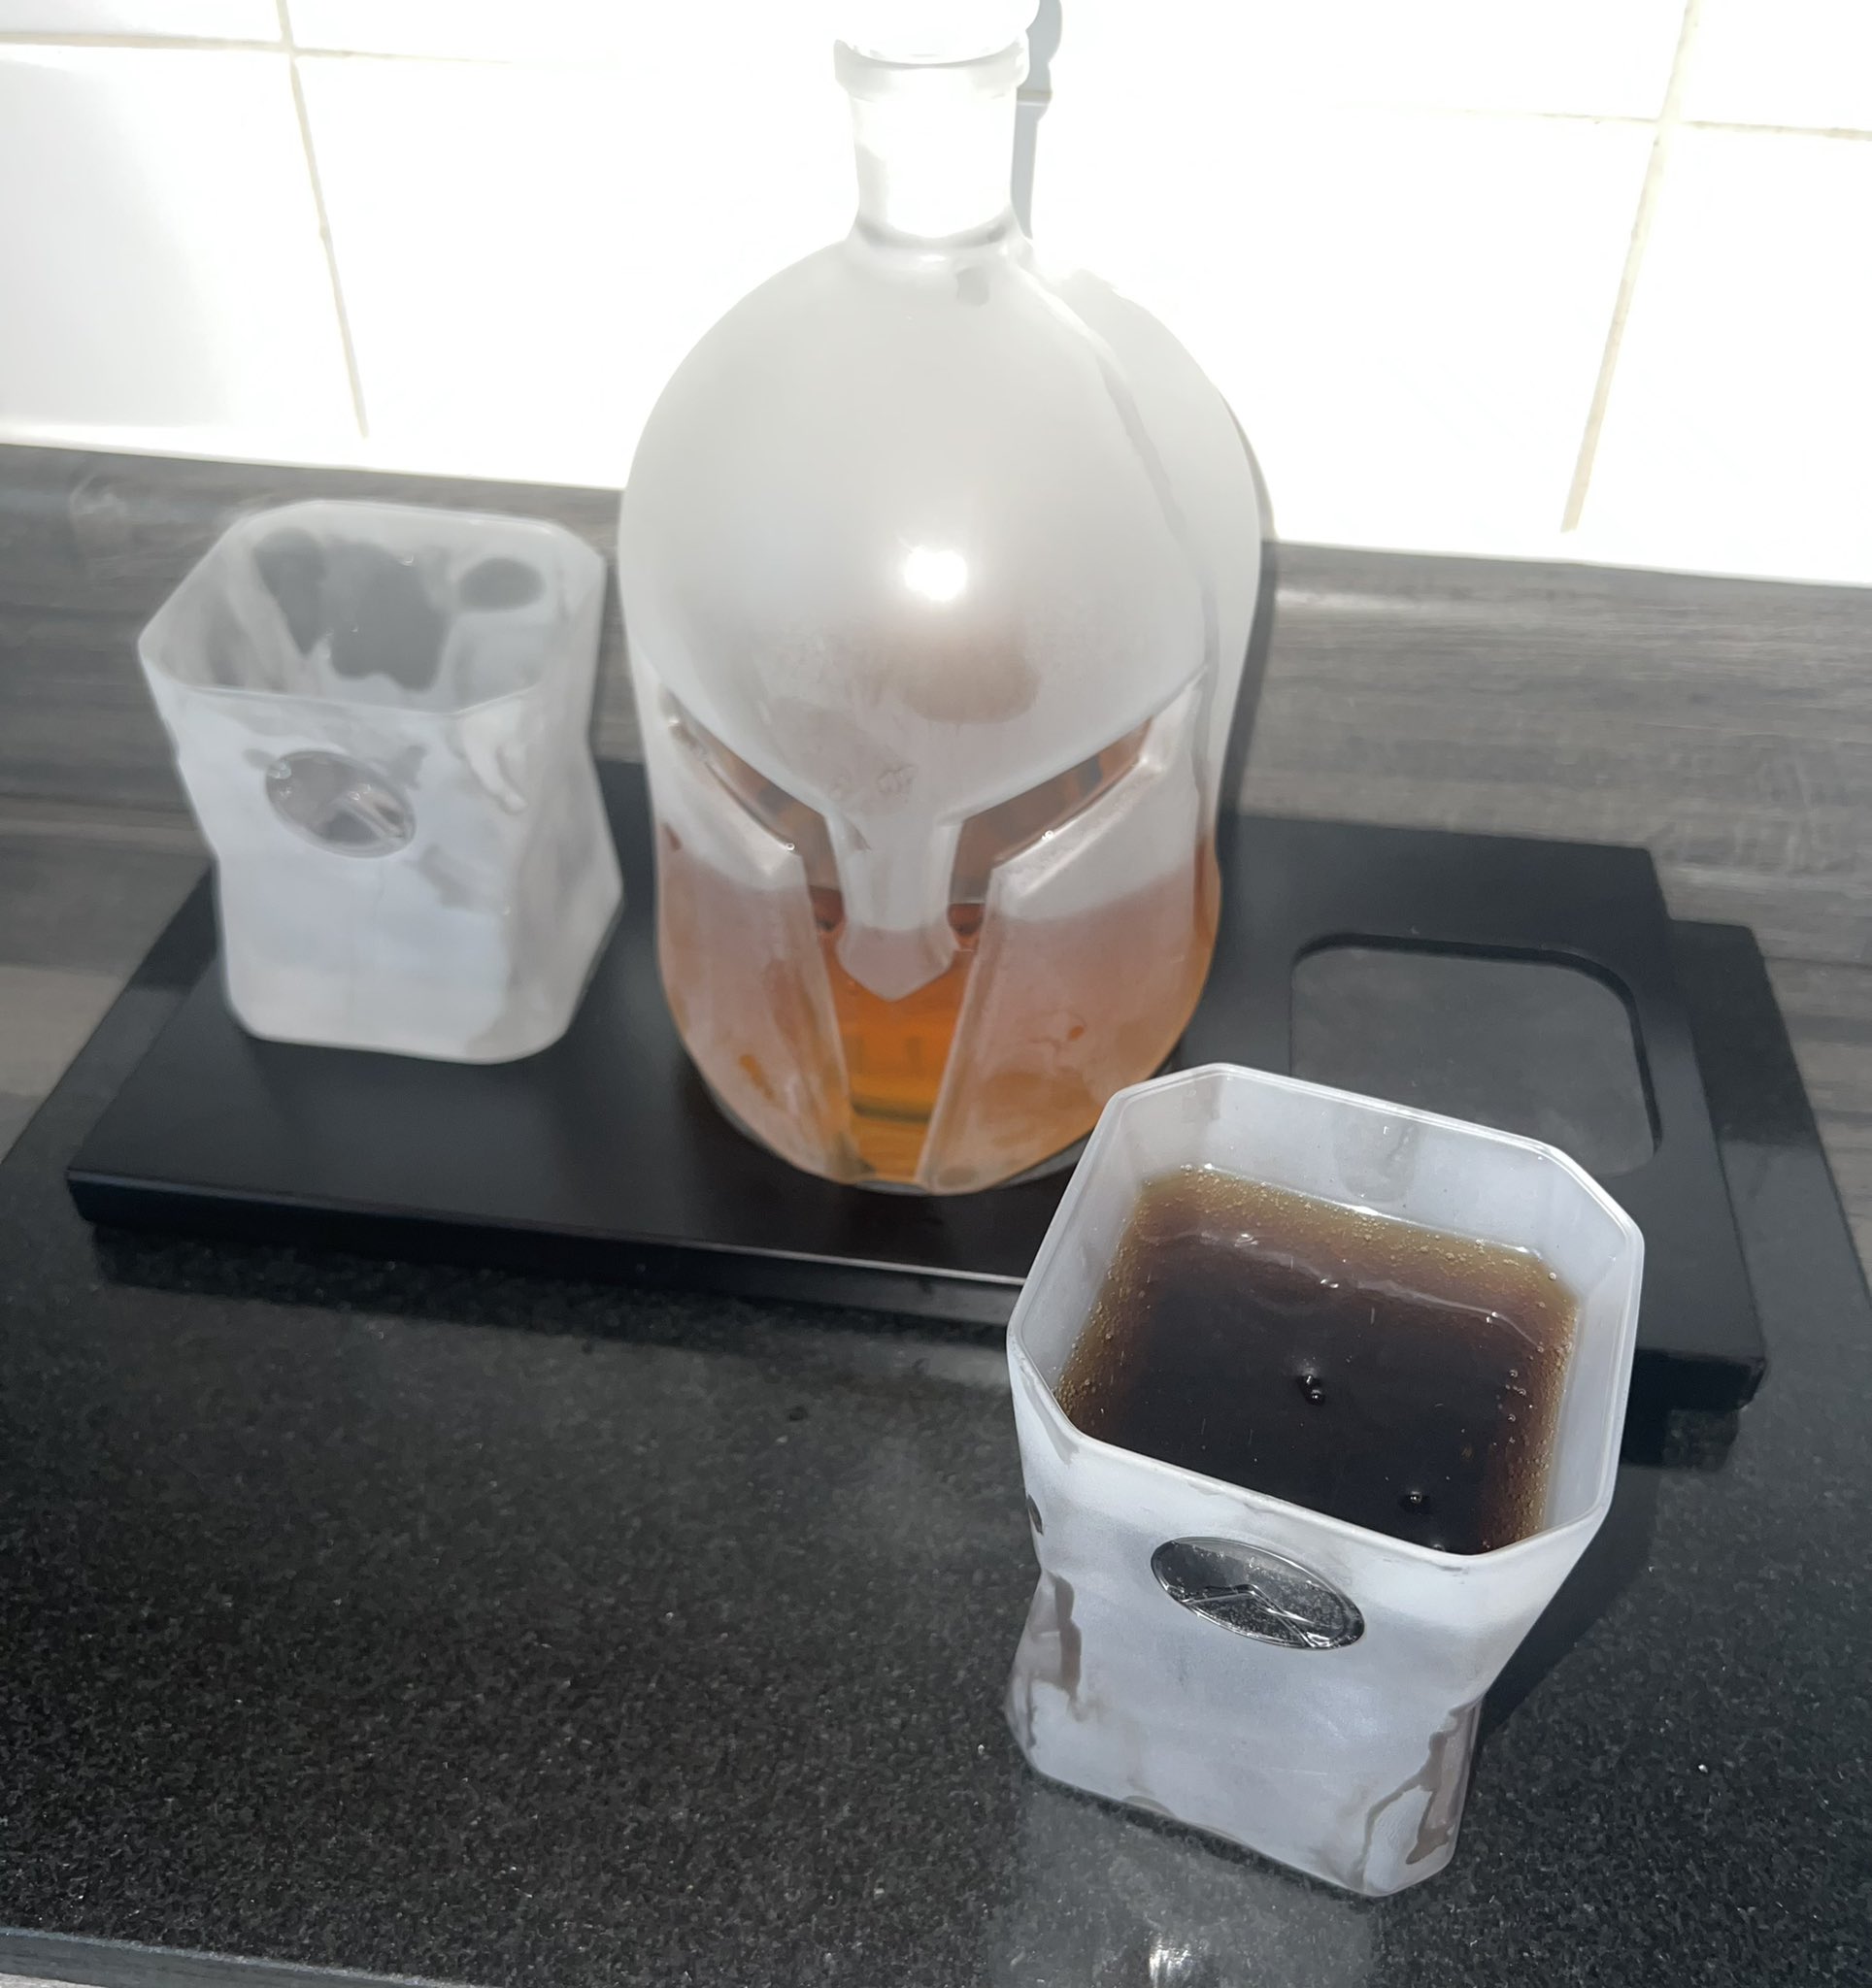 Wolf Whiskey - The Spartan Edition decanter set: ON SALE. Use code  THISISSPARTA22 for free UK delivery. * * * * #Quote #Inspiration #Whisky # Decanter #WhiskyDecanter #300 #StartUp #NewBusiness #ForTheBoys  #WolfWhiskey #LeadThePack #